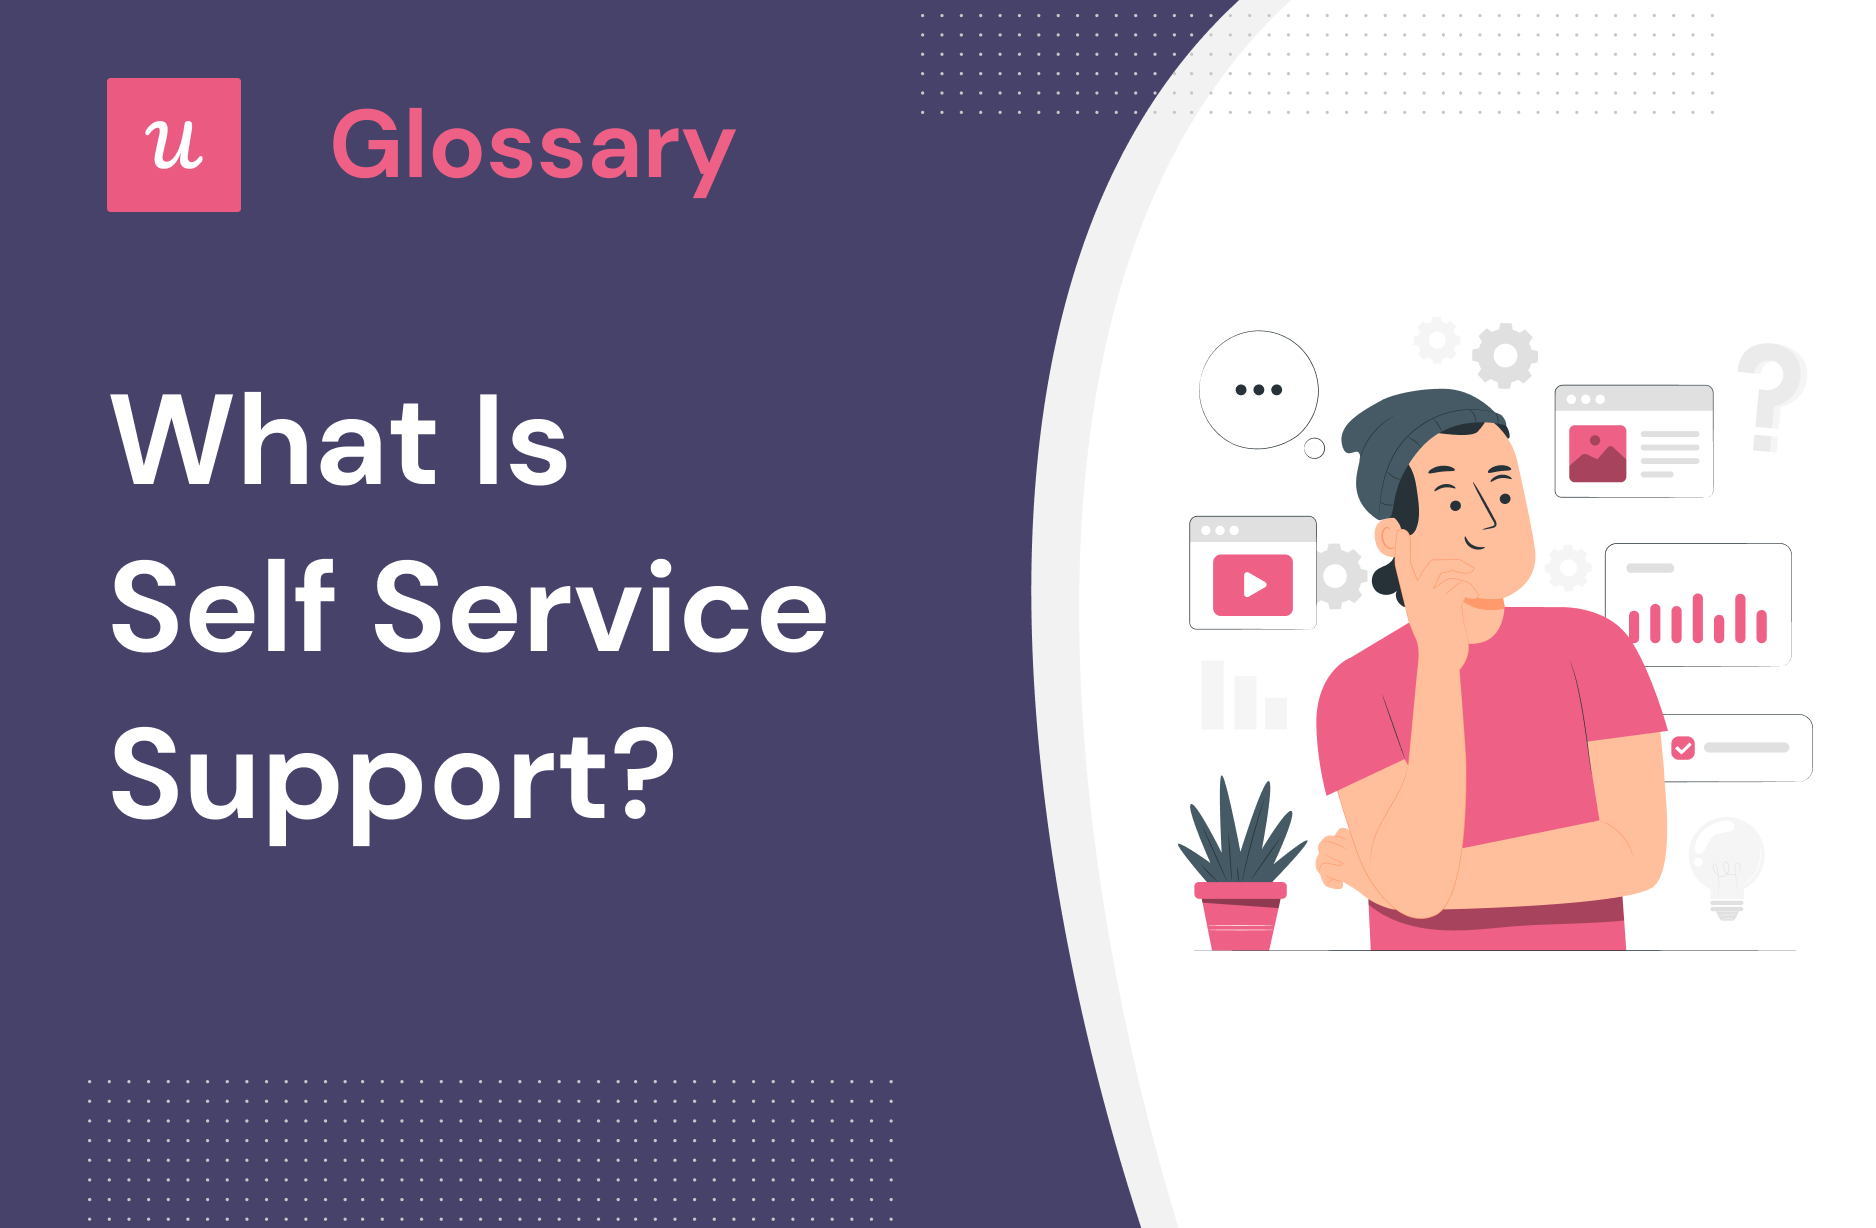 What is Self Service Support?